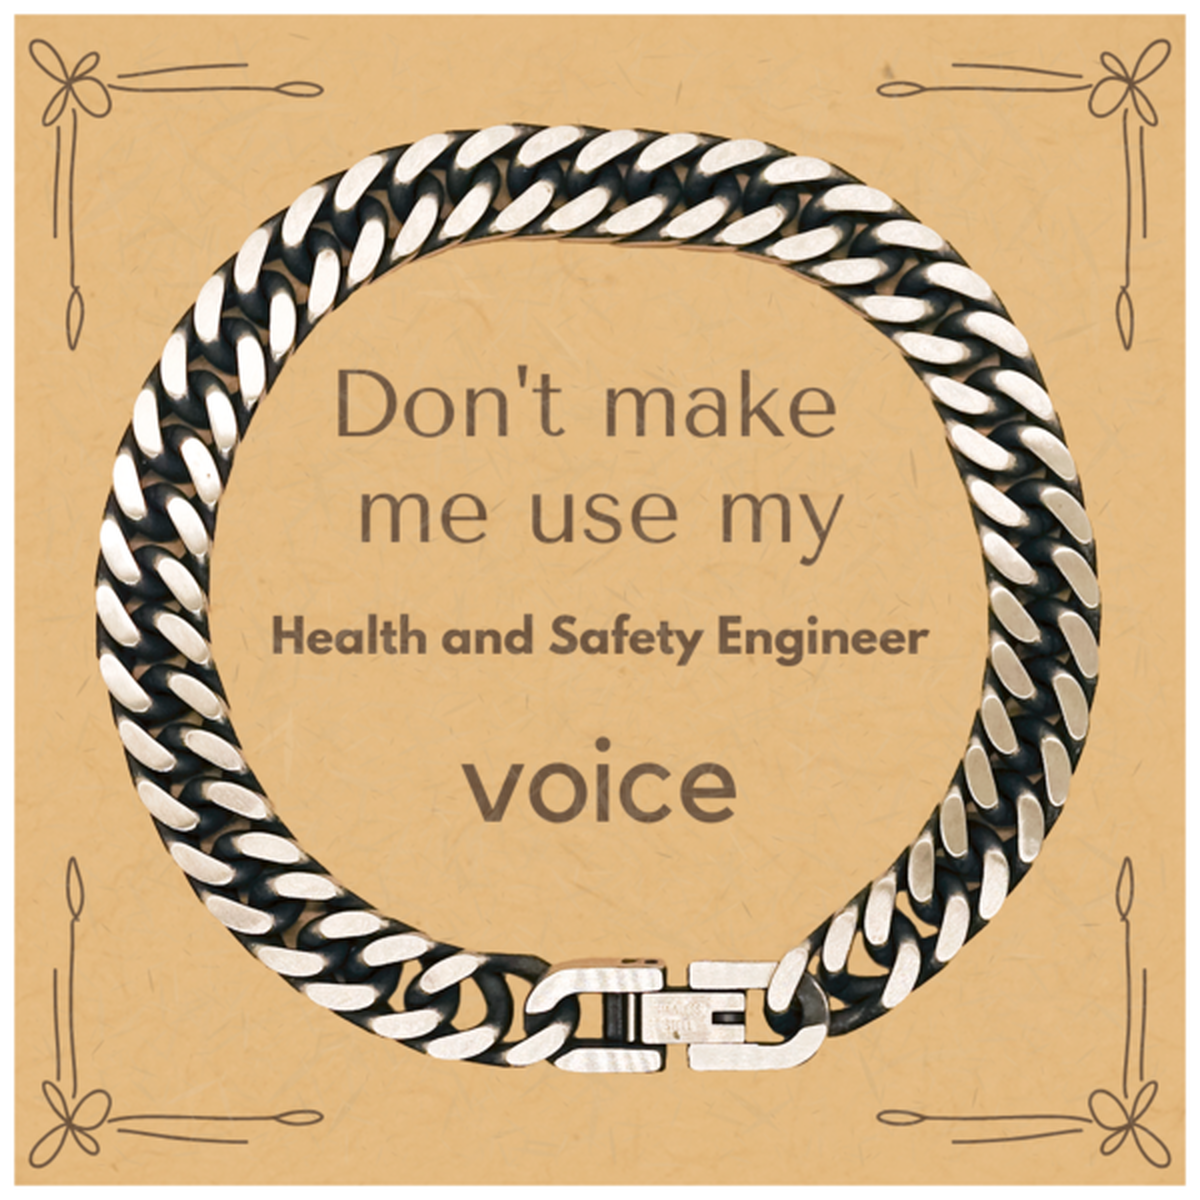 Don't make me use my Health and Safety Engineer voice, Sarcasm Health and Safety Engineer Card Gifts, Christmas Health and Safety Engineer Cuban Link Chain Bracelet Birthday Unique Gifts For Health and Safety Engineer Coworkers, Men, Women, Colleague, Fri